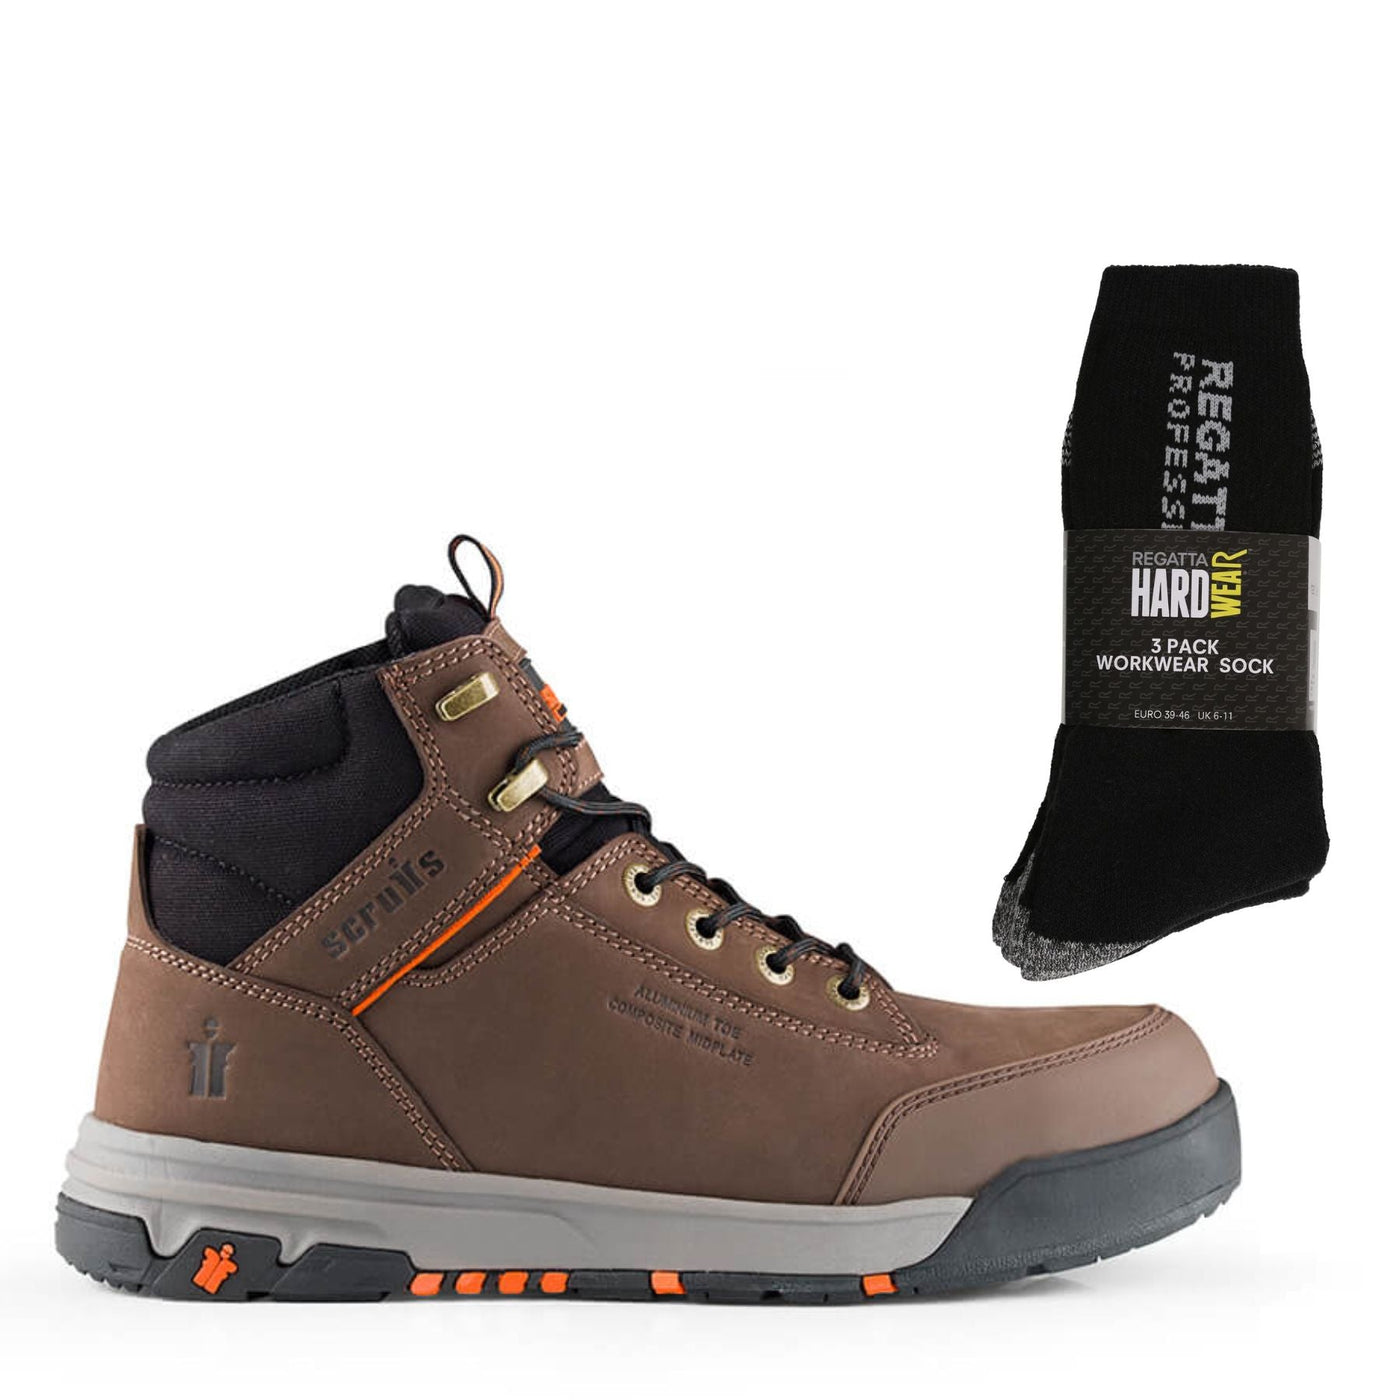 Scruffs Special Offer Pack - Switchback 3 Safety Work Boots + Socks